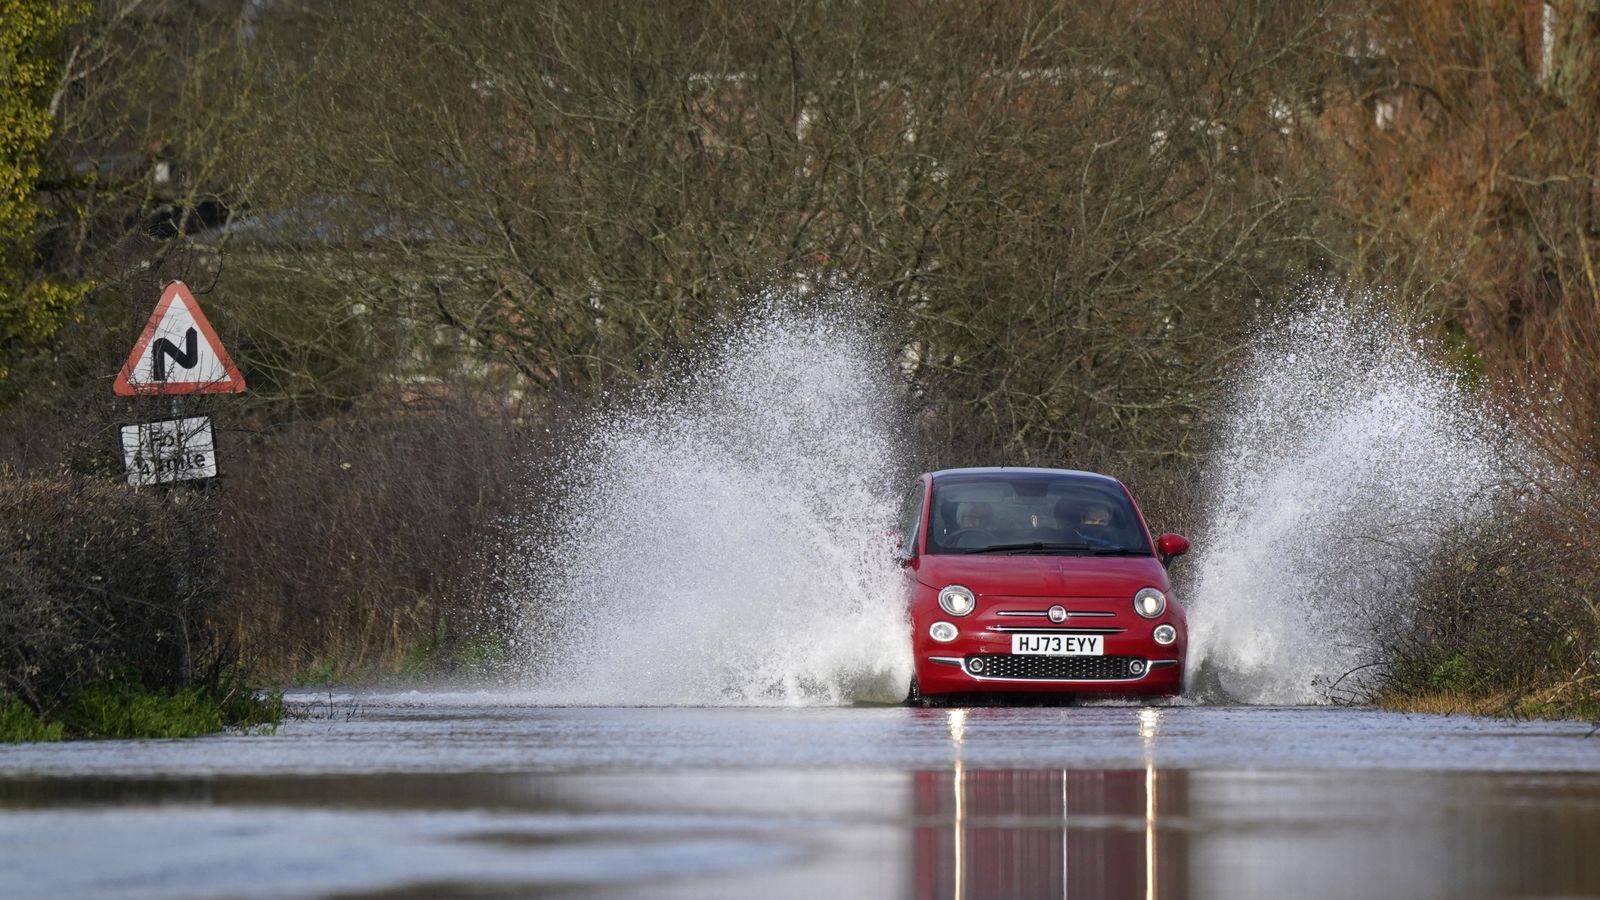 UK weather: Threat of flooding as heavy rain forecast for parts of country